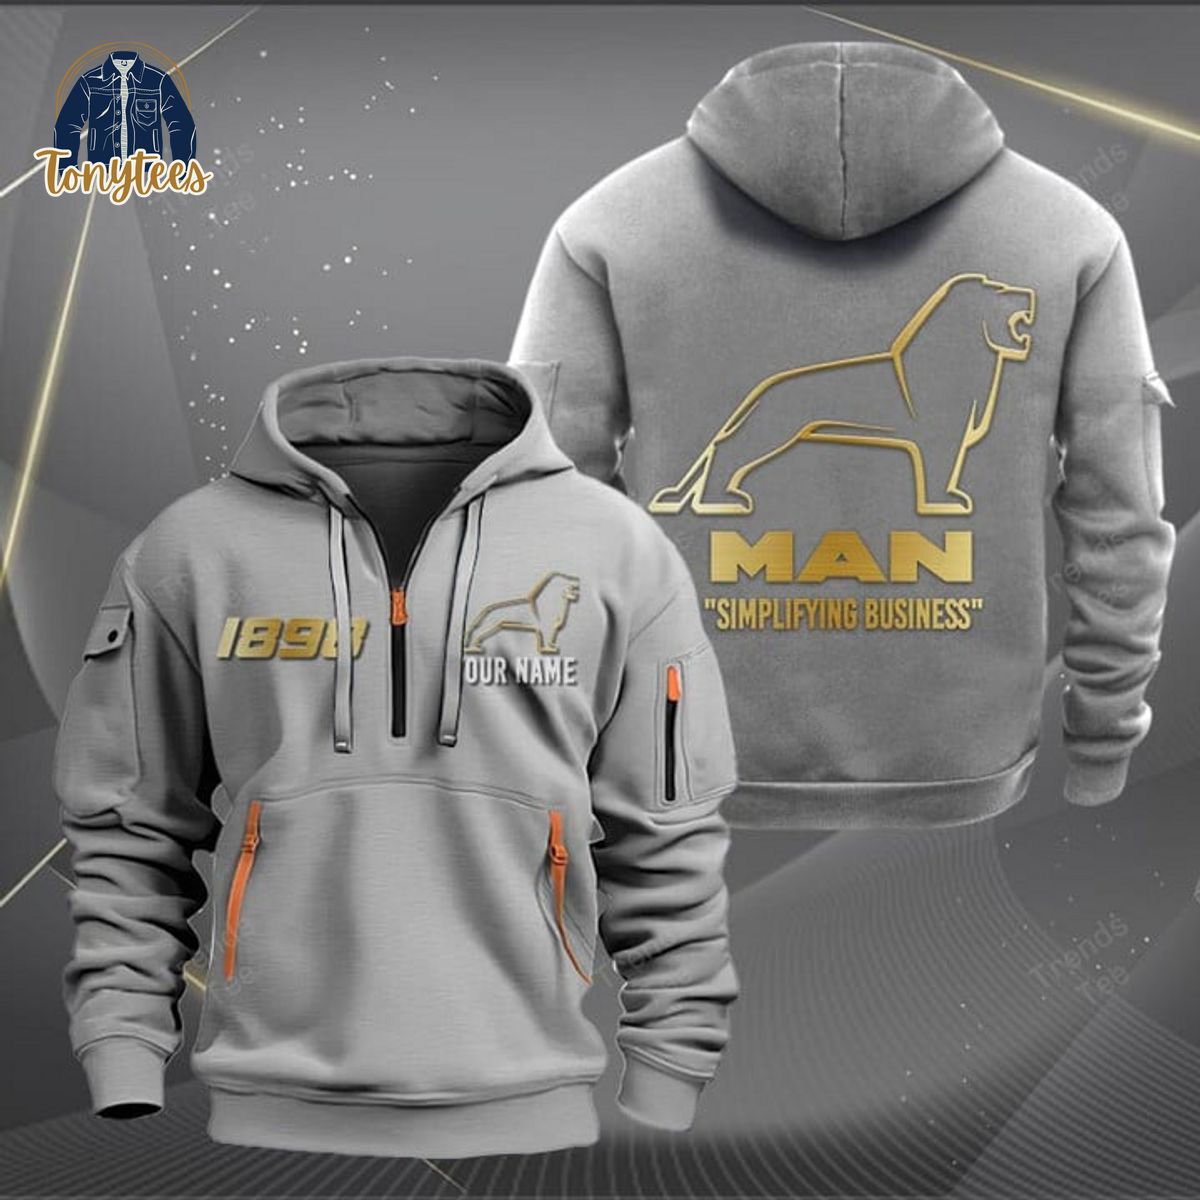 MAN Simplifying Business Personalized Heavy Hoodie